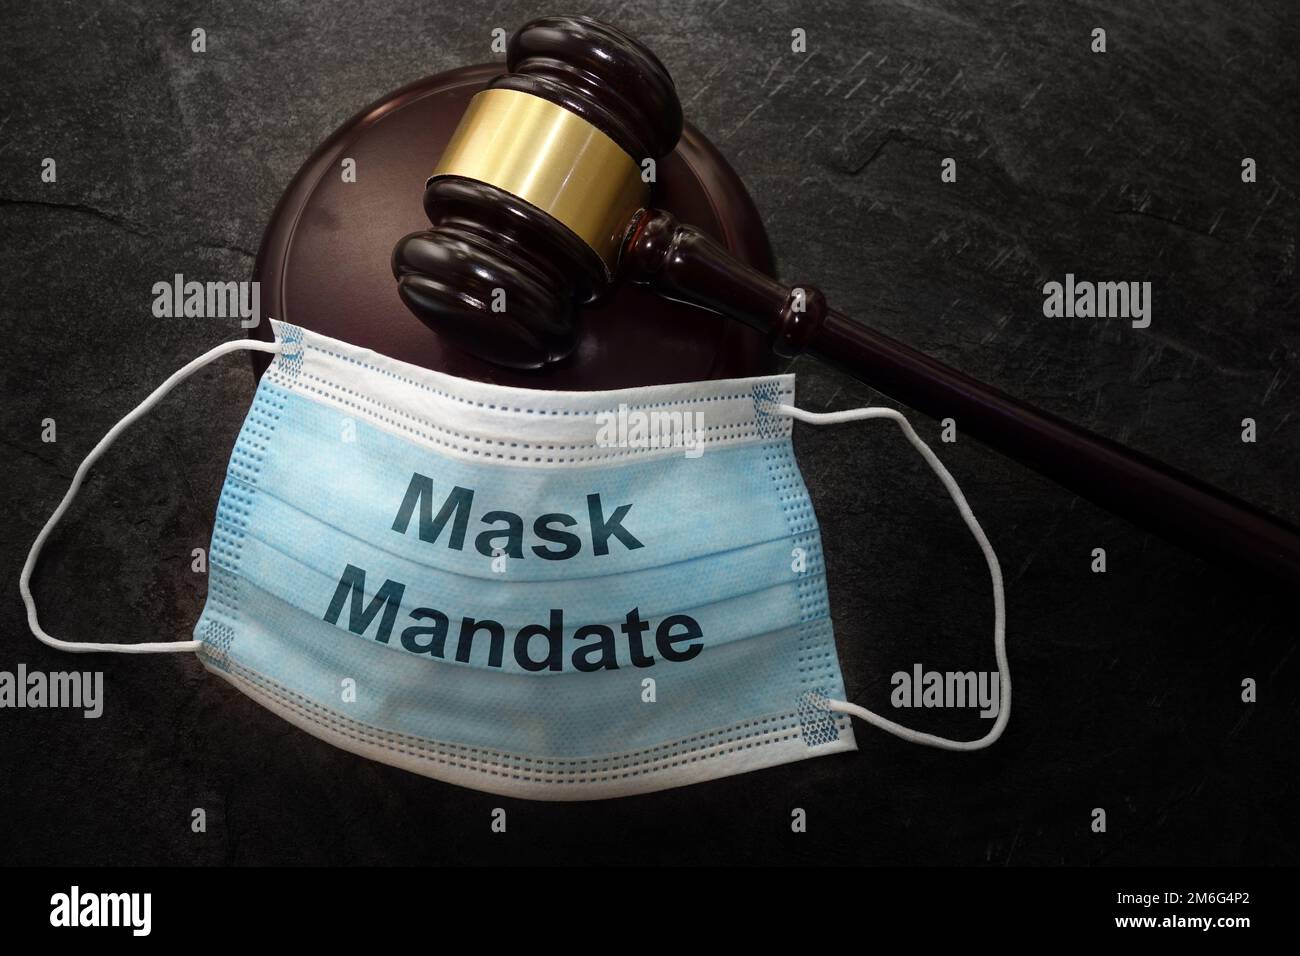 Court legal gavel and Mask Mandate facemask Stock Photo